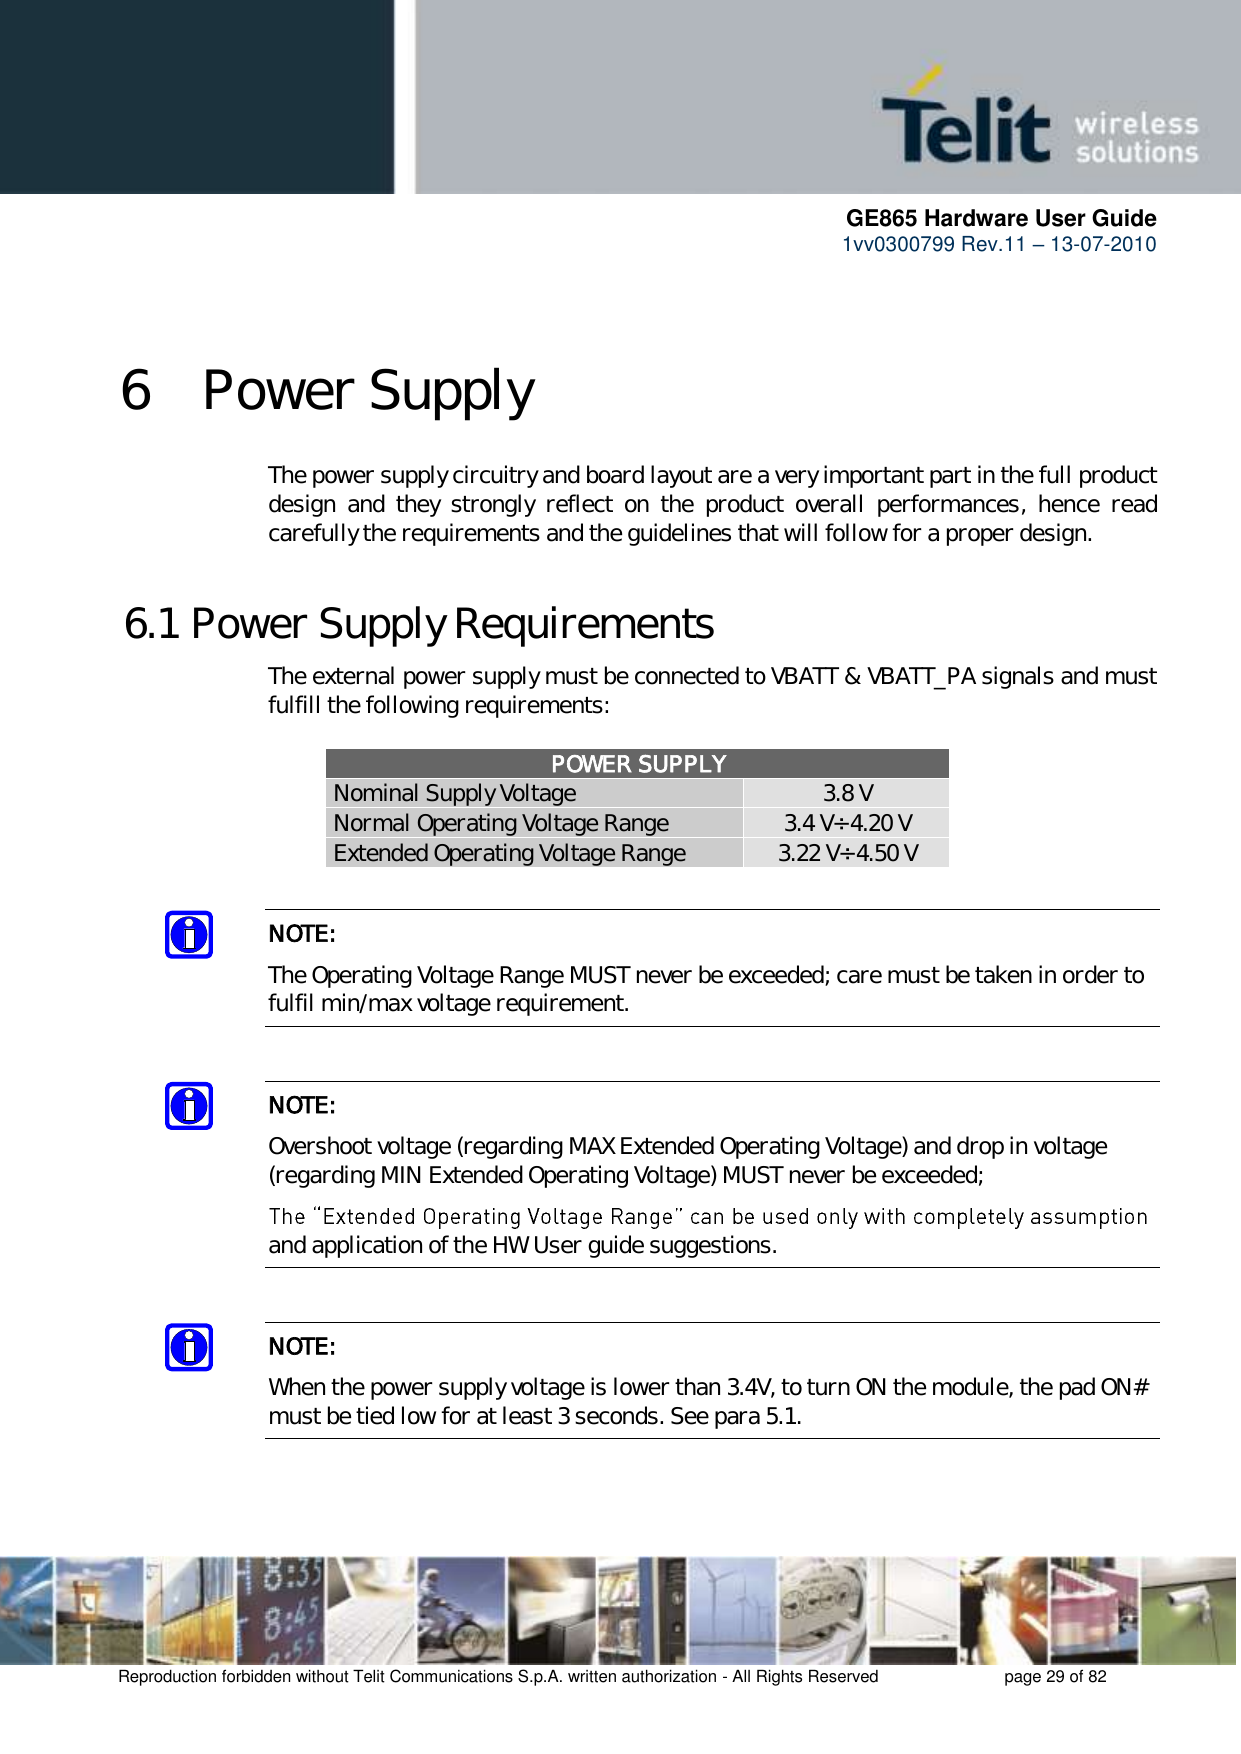      GE865 Hardware User Guide 1vv0300799 Rev.11 – 13-07-2010       Reproduction forbidden without Telit Communications S.p.A. written authorization - All Rights Reserved    page 29 of 82  6 Power Supply The power supply circuitry and board layout are a very important part in the full product design  and  they  strongly  reflect  on  the  product  overall  performances,  hence  read carefully the requirements and the guidelines that will follow for a proper design. 6.1 Power Supply Requirements The external power supply must be connected to VBATT &amp; VBATT_PA signals and must fulfill the following requirements:  POWER SUPPLY Nominal Supply Voltage 3.8 V Normal Operating Voltage Range 3.4 V÷ 4.20 V Extended Operating Voltage Range 3.22 V÷ 4.50 V  NOTE: The Operating Voltage Range MUST never be exceeded; care must be taken in order to fulfil min/max voltage requirement.  NOTE: Overshoot voltage (regarding MAX Extended Operating Voltage) and drop in voltage (regarding MIN Extended Operating Voltage) MUST never be exceeded;  and application of the HW User guide suggestions.   NOTE: When the power supply voltage is lower than 3.4V, to turn ON the module, the pad ON# must be tied low for at least 3 seconds. See para 5.1.    